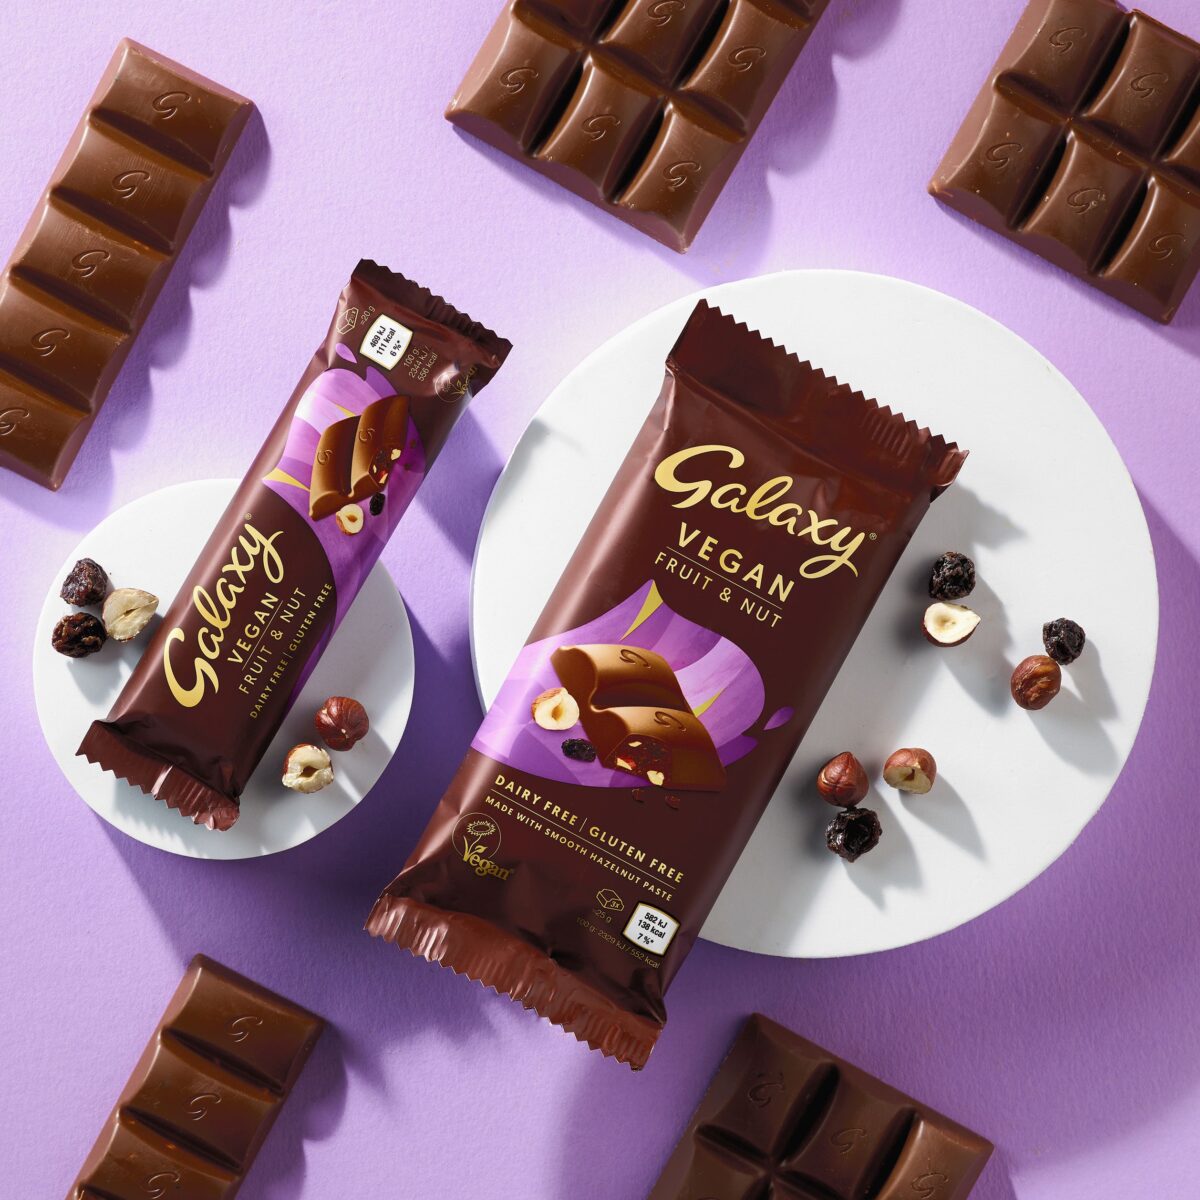 The new Galaxy Fruit and Nut bar launched in Veganuary 2024